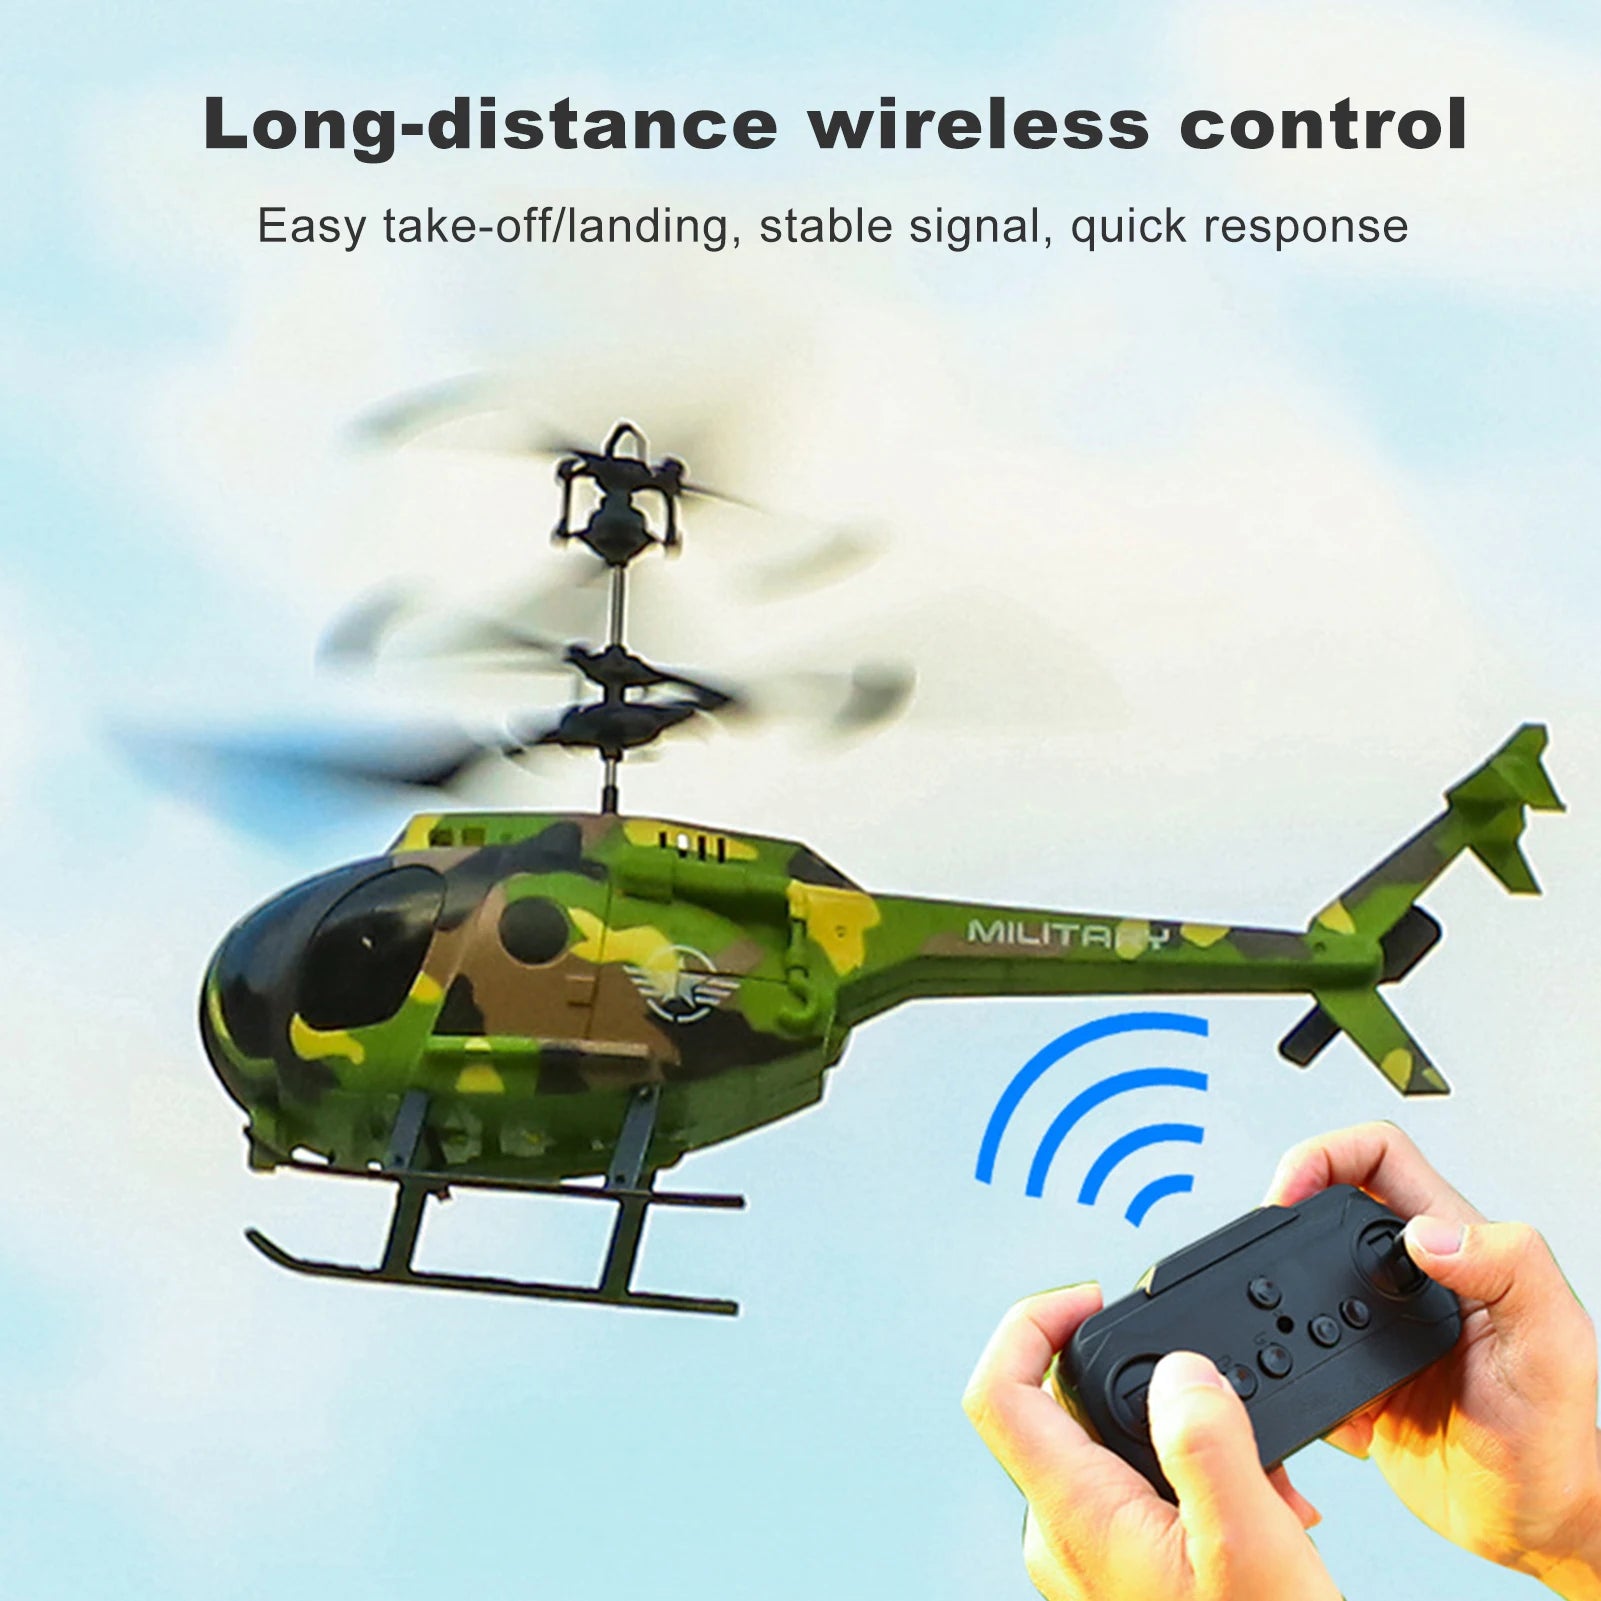 C135 RC Helicopter, wireless long-distance control Easy take-offllanding, stable signal, quick